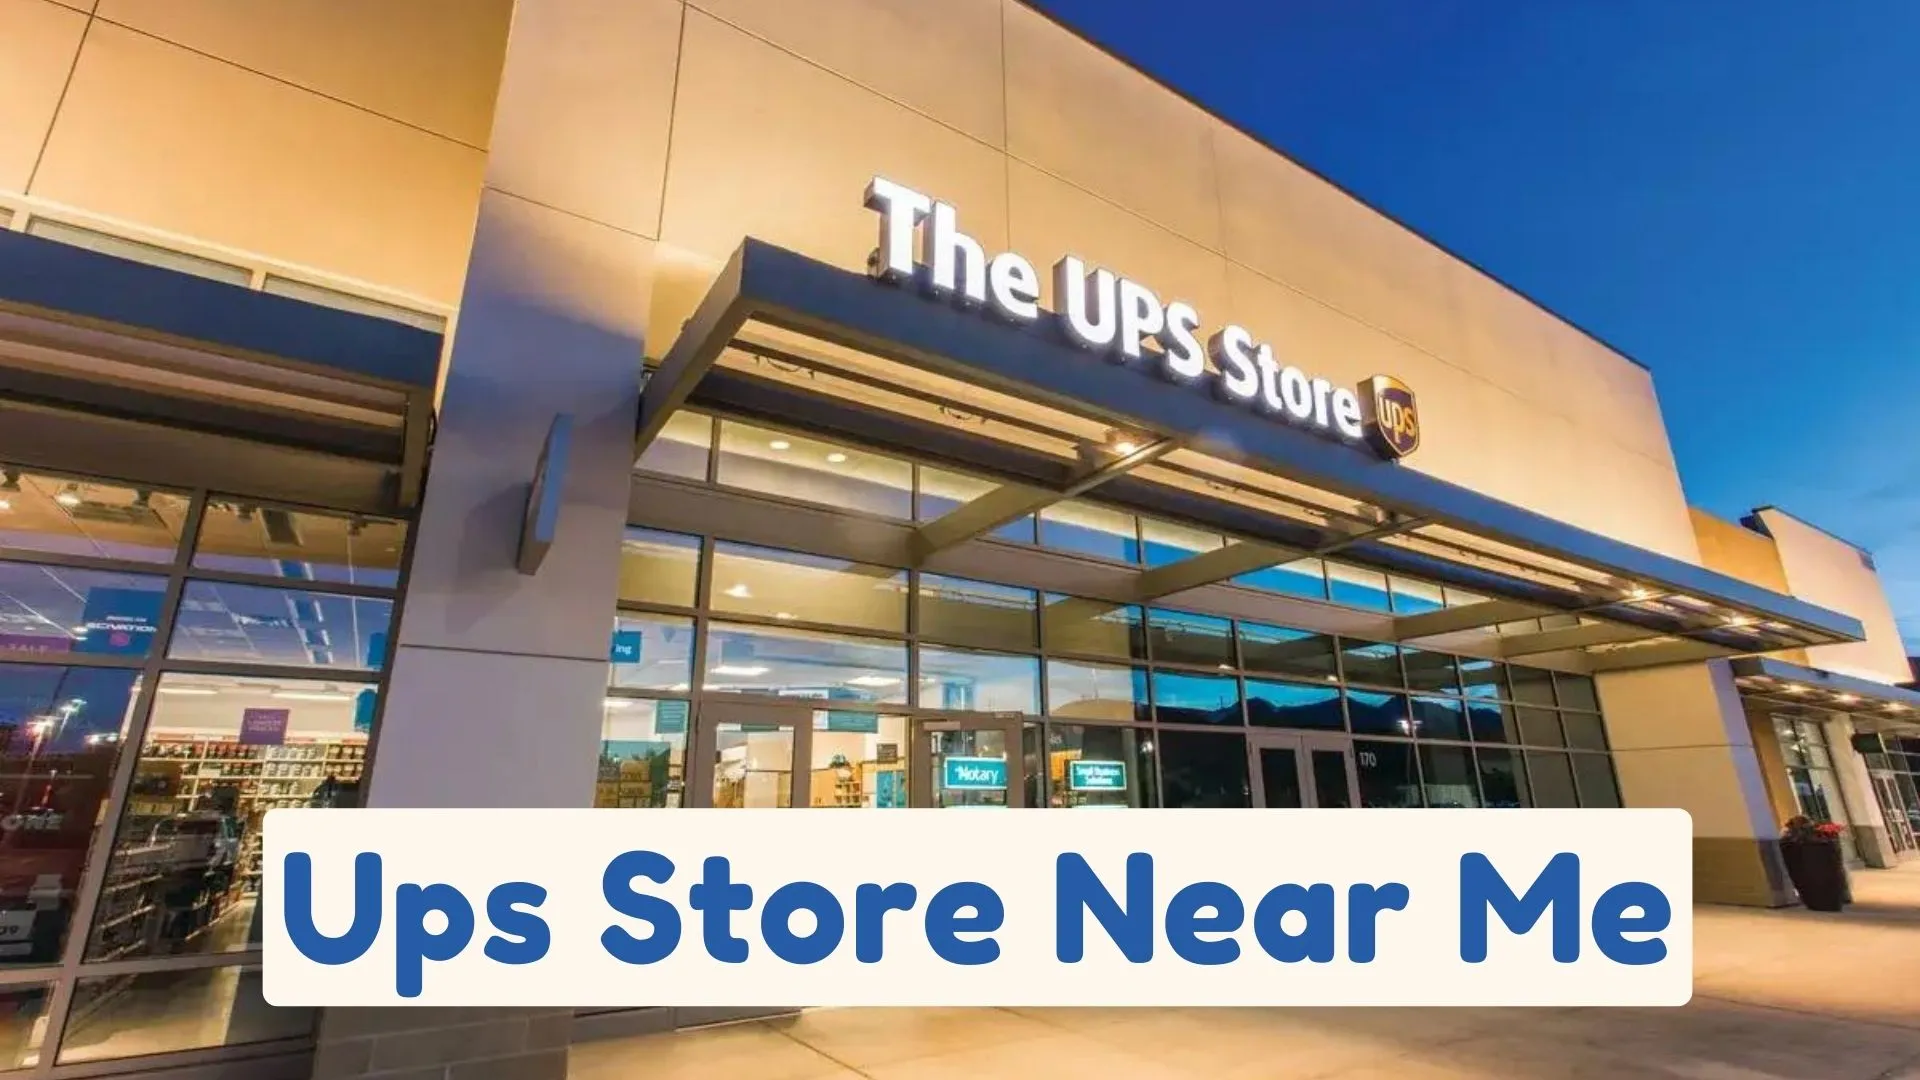 A Quick Guide To Finding Ups Store Hours & UPS Delivery Hours Near Me | Also Find At What Time Does Ups Store Close and Open Today?